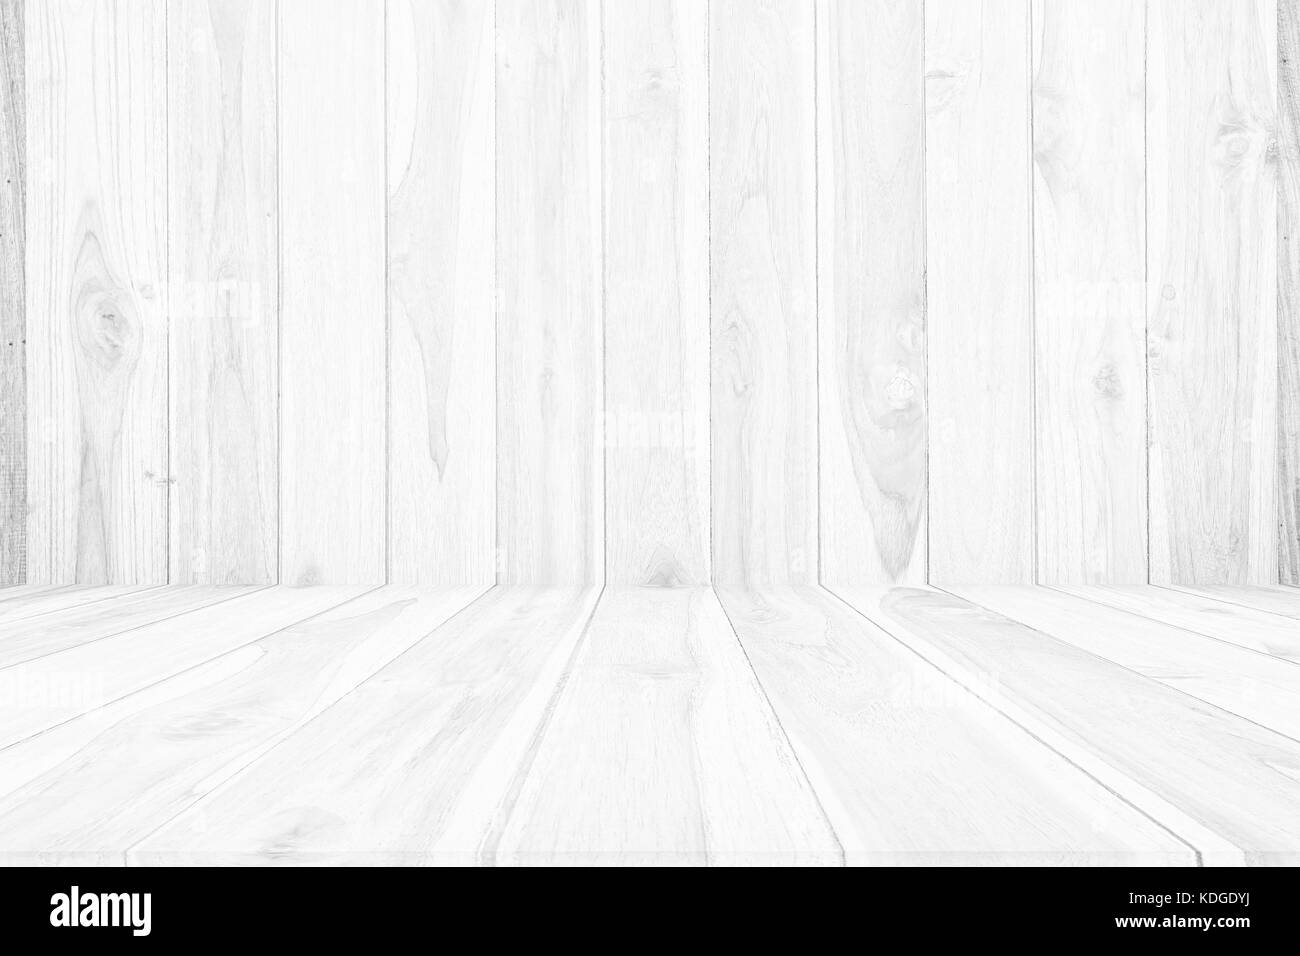 Wood background,White wood floor agent wood wall for design Stock Photo